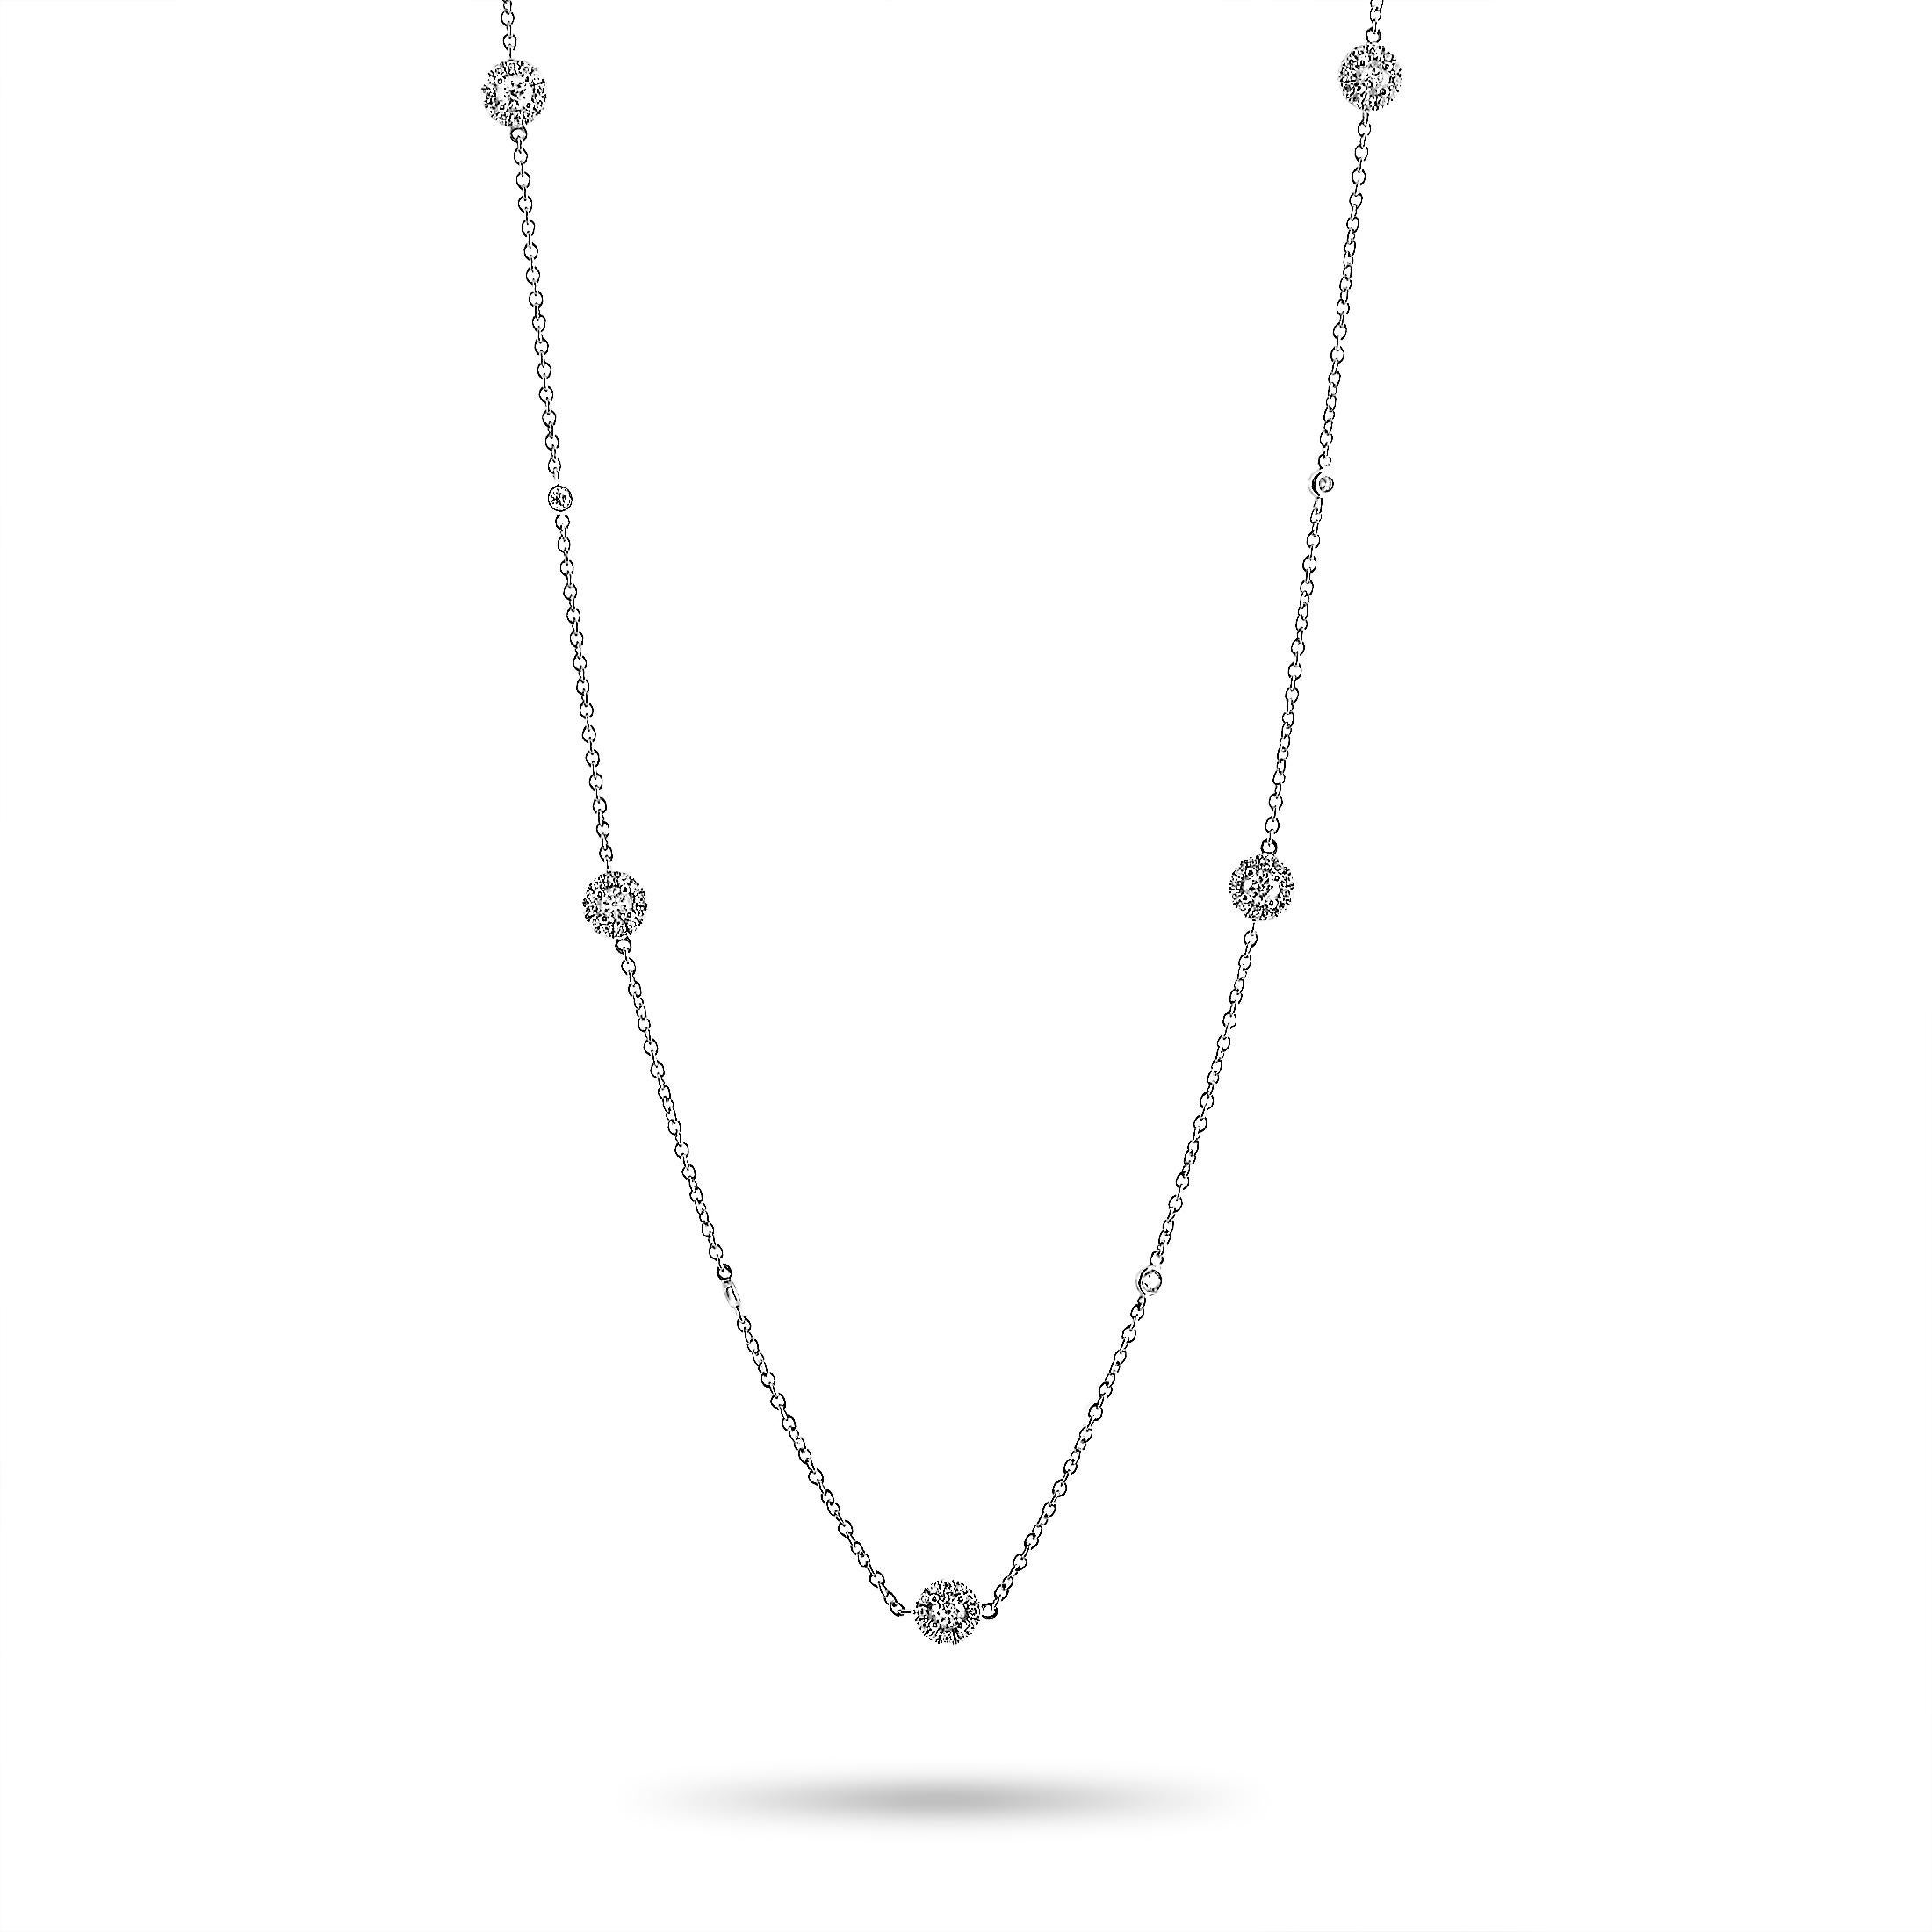 This LB Exclusive necklace is crafted from 18K white gold and weighs 9.2 grams, measuring 40” in length. The necklace is set with diamonds that weigh 3.01 carats in total.

Offered in brand new condition, this jewelry piece includes a gift box.